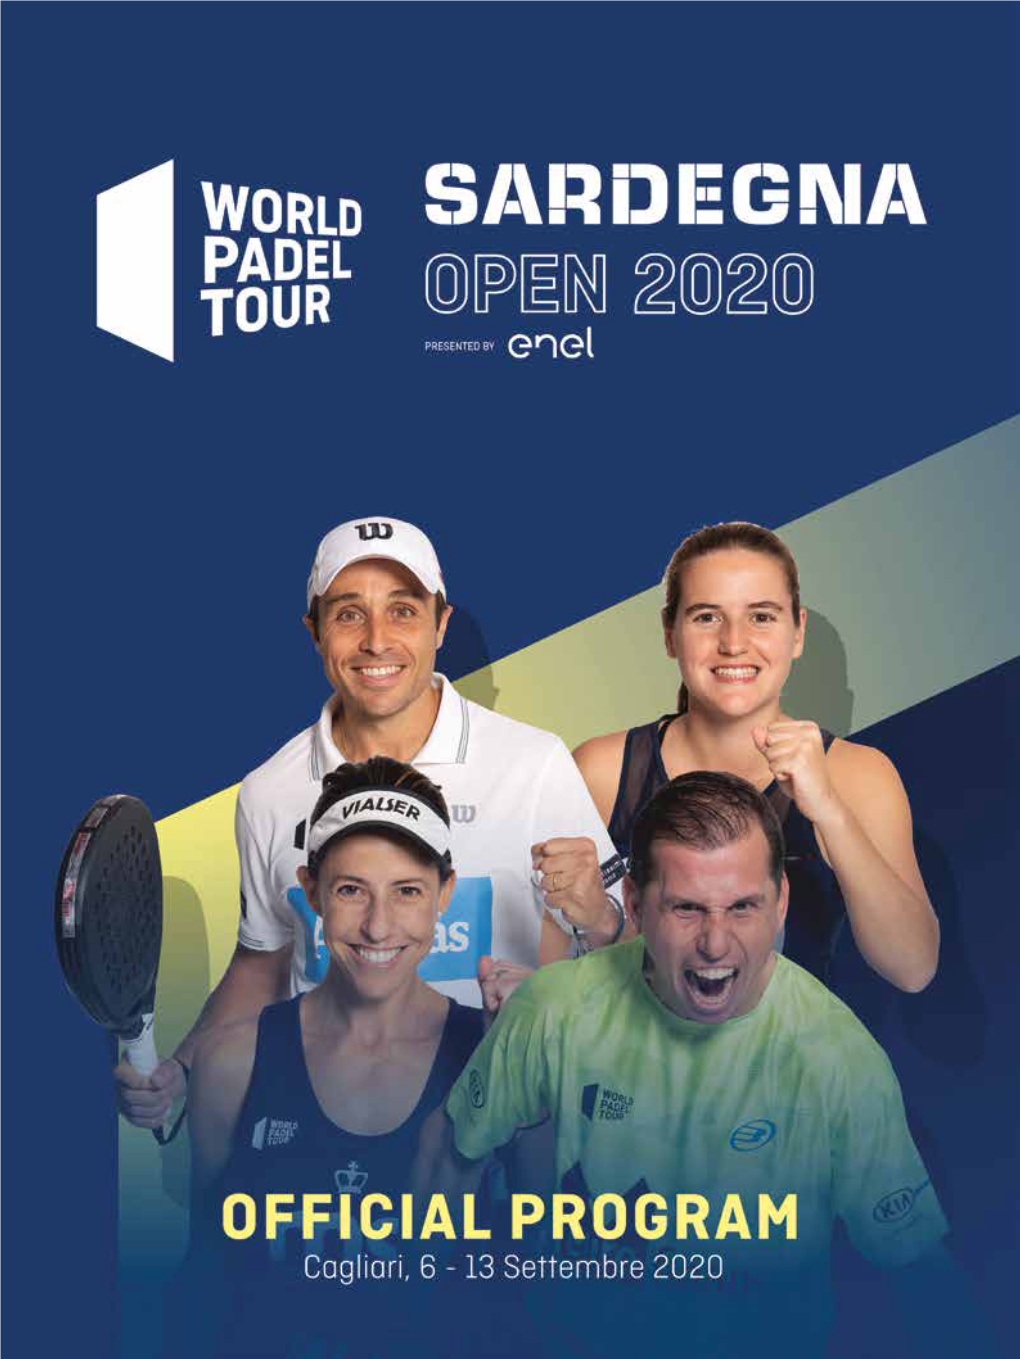 THE He World Padel Tour Is a Professional